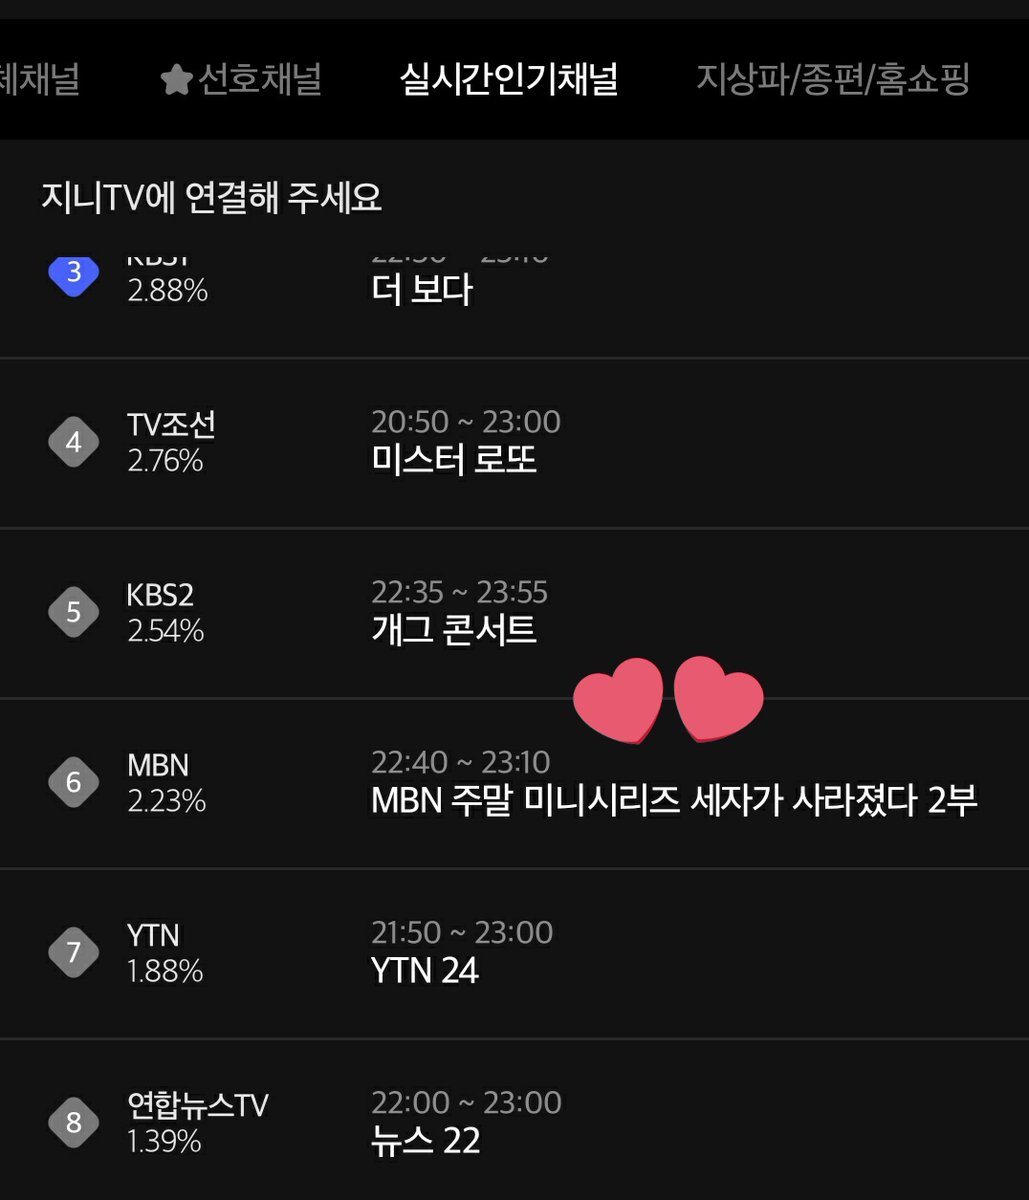 #MissingCrownPrince Highest real time rating for EP 2 was 2.23 so there was a rise today

#MissingCrownPrince
#세자가사라졌다 
#MissingCrownPrinceEp3
#Suho #수호